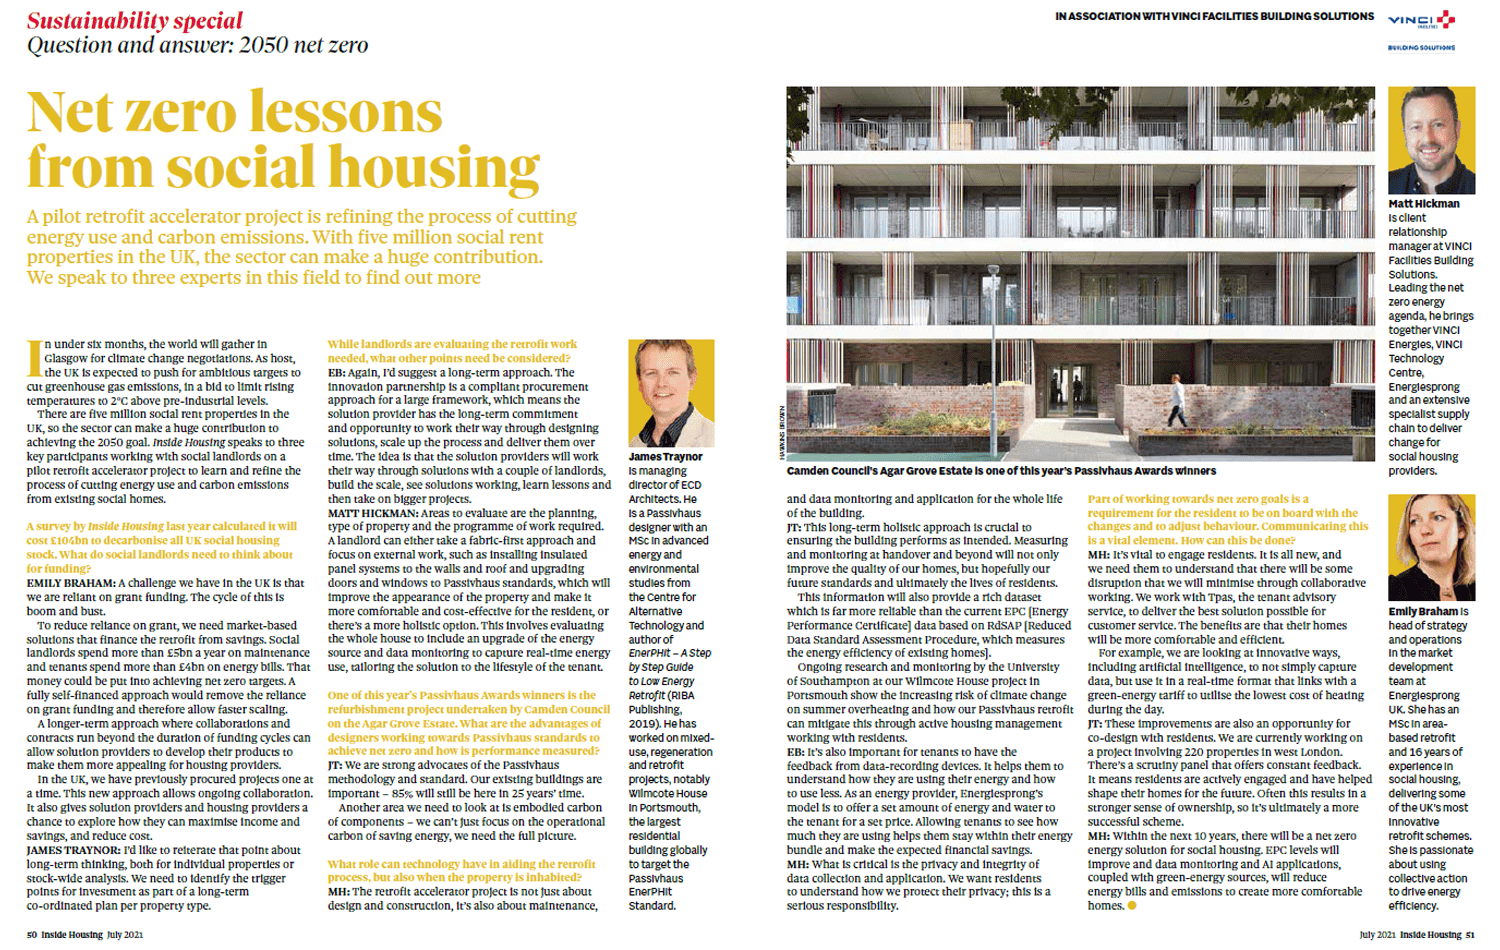 Inside Housing Article Image